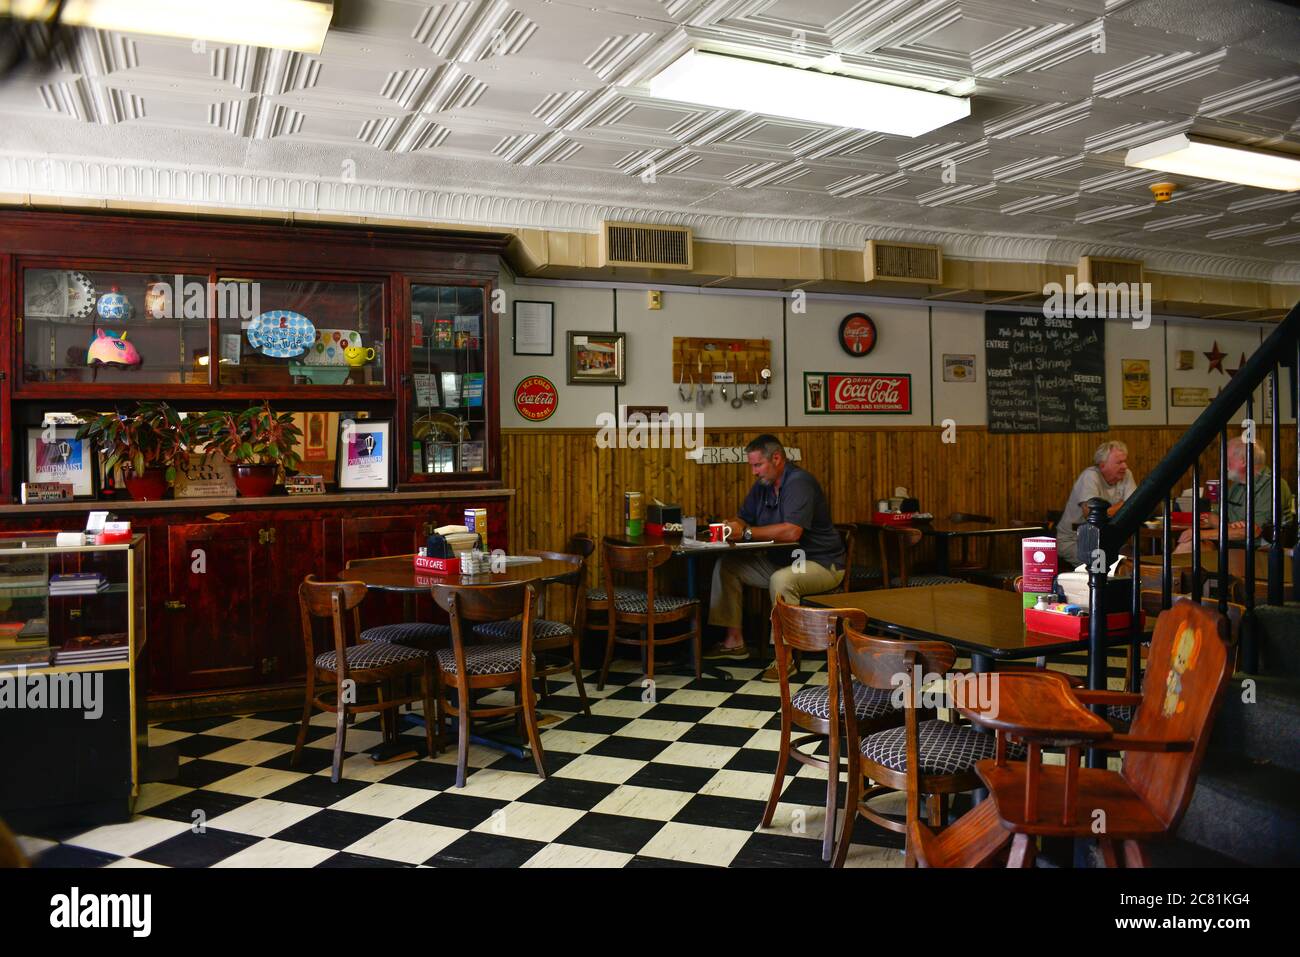 Interior of the City Cafe with people having lunch, a mainstay known as the oldest restaurant in TN, on the square in Murfreesboro, TN Stock Photo